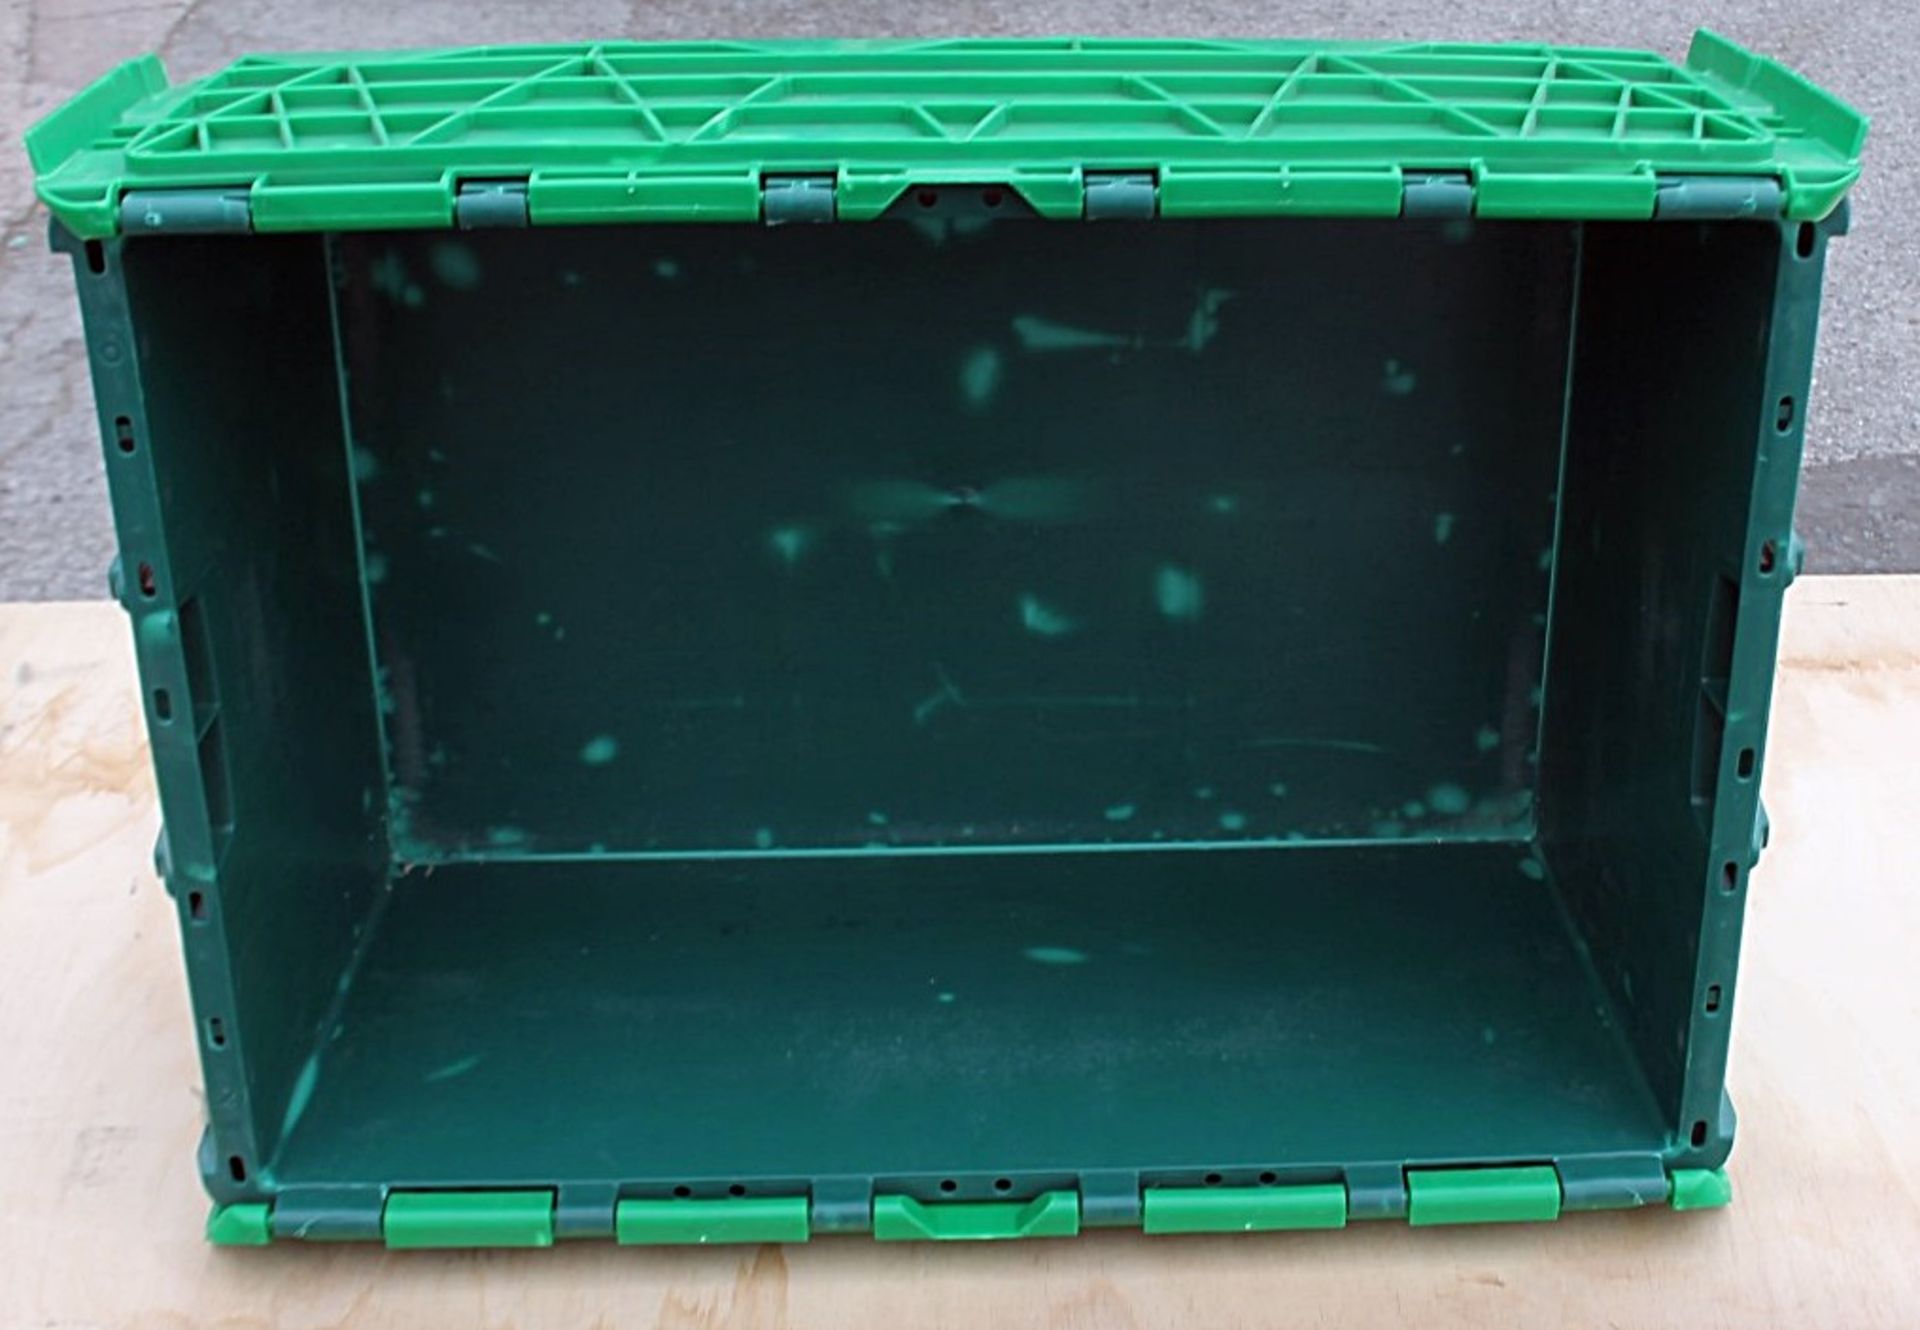 20 x Robust Low Profile Green Plastic Secure Storage Boxes With Attached Hinged Lids - Dimensions: - Image 5 of 5